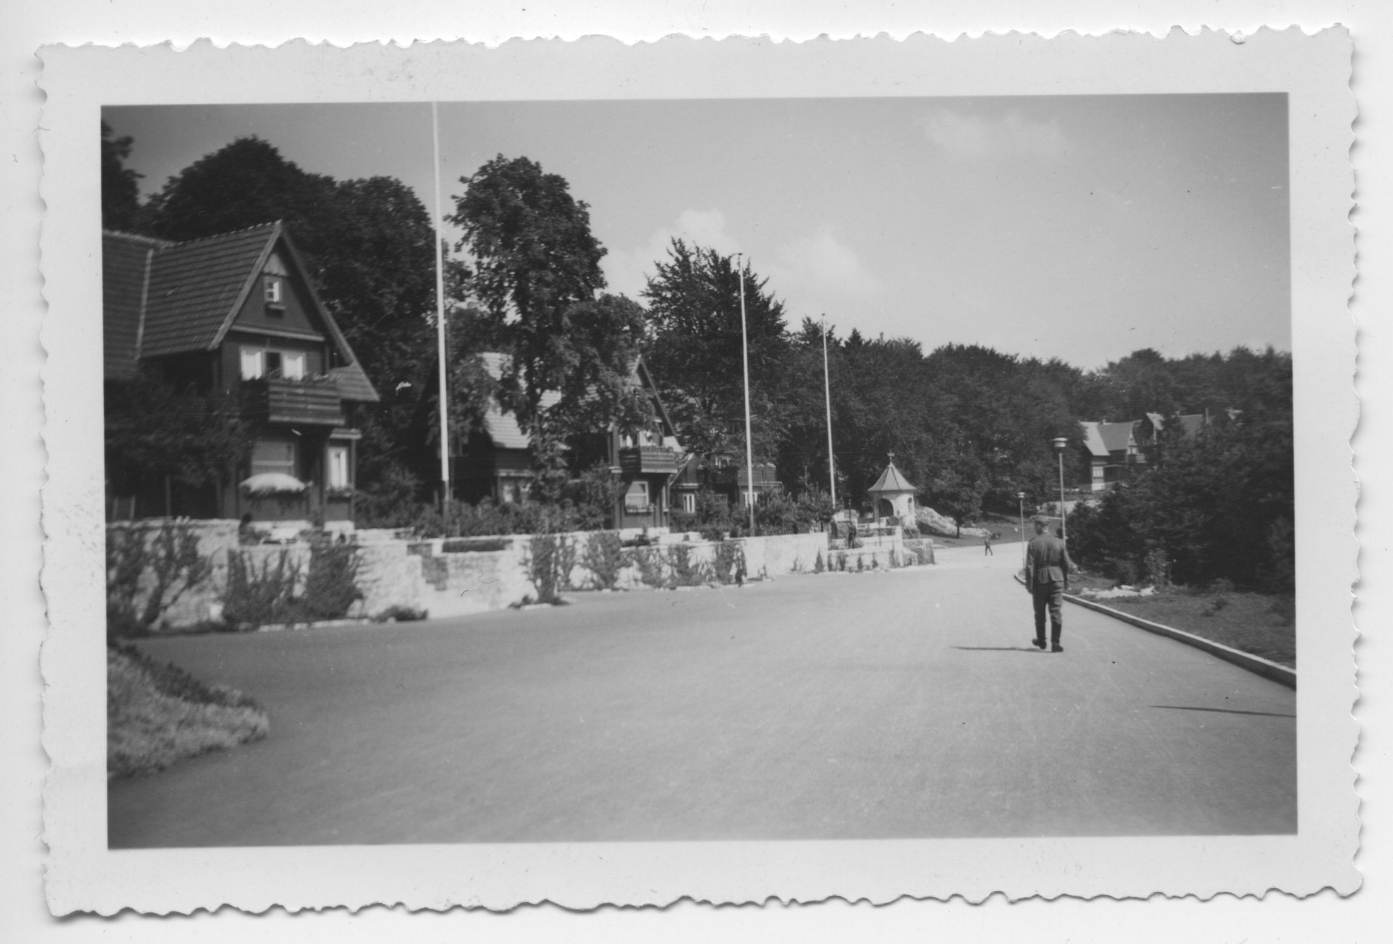 View of Villenstraße in the SS-Führersiedlung, 1940. The street is wide, the two-story villas with balconies facing the street are separated by tall trees.